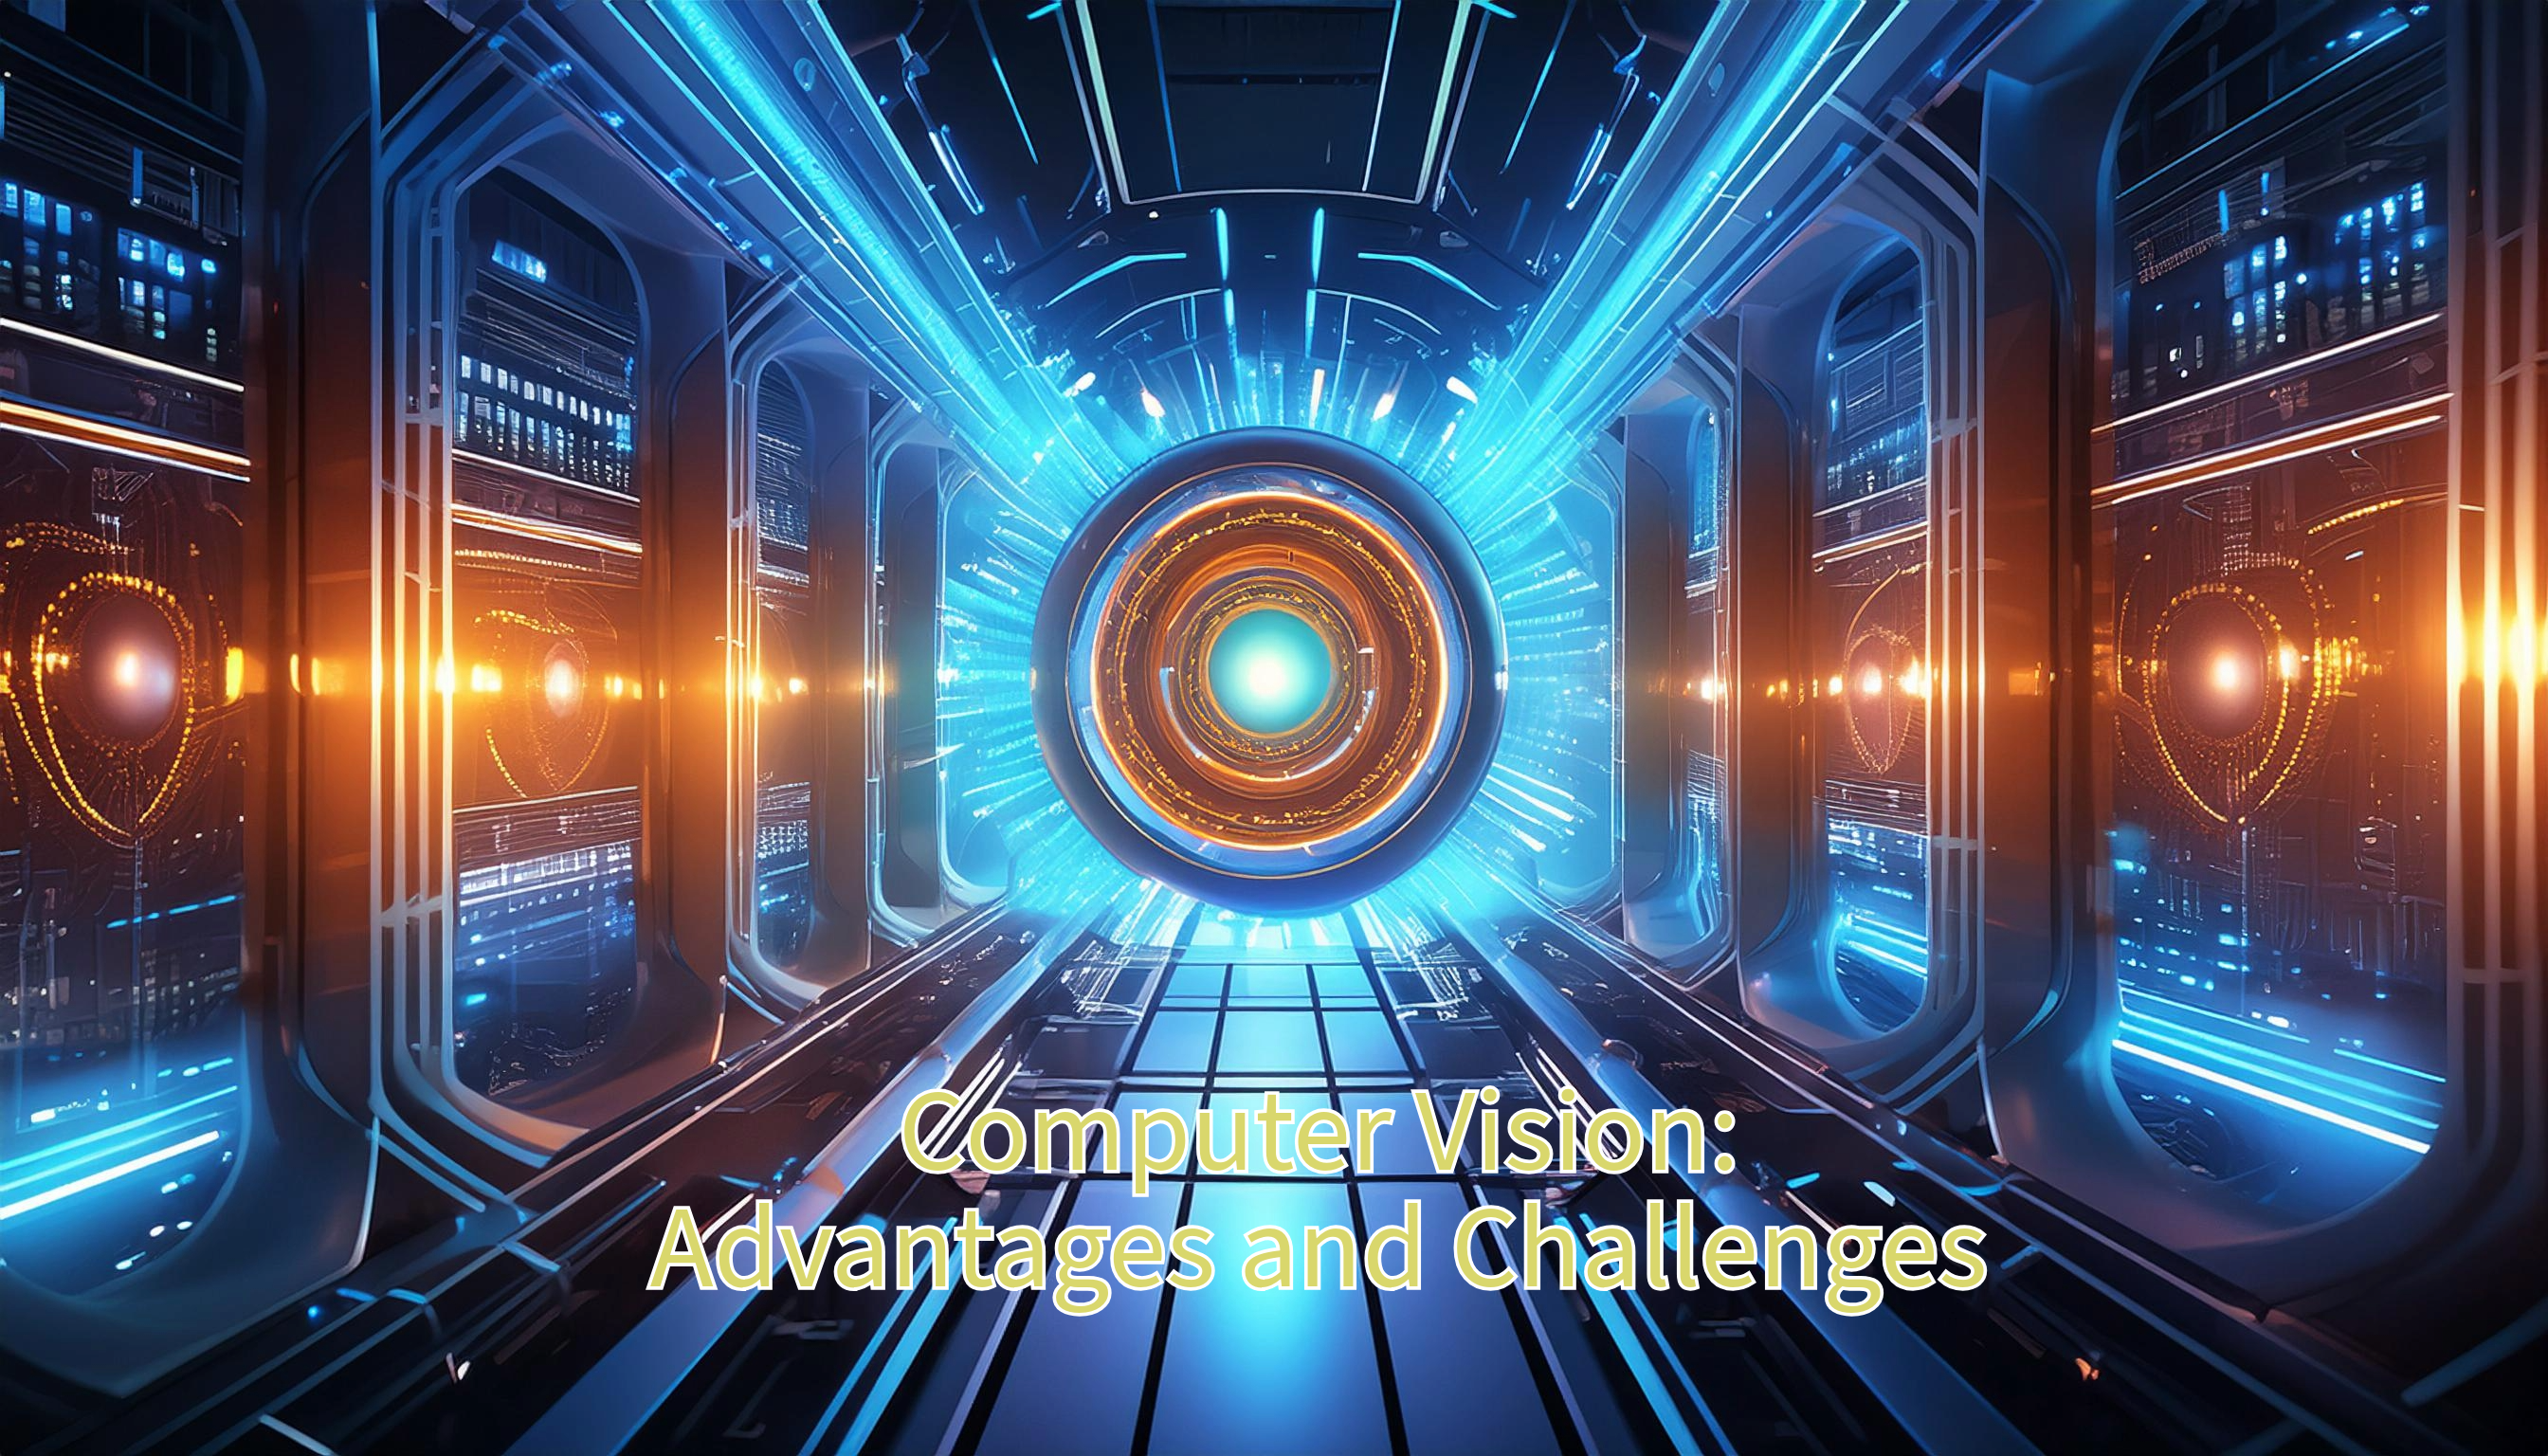 Introduction to Computer Vision: Advantages and Challenges